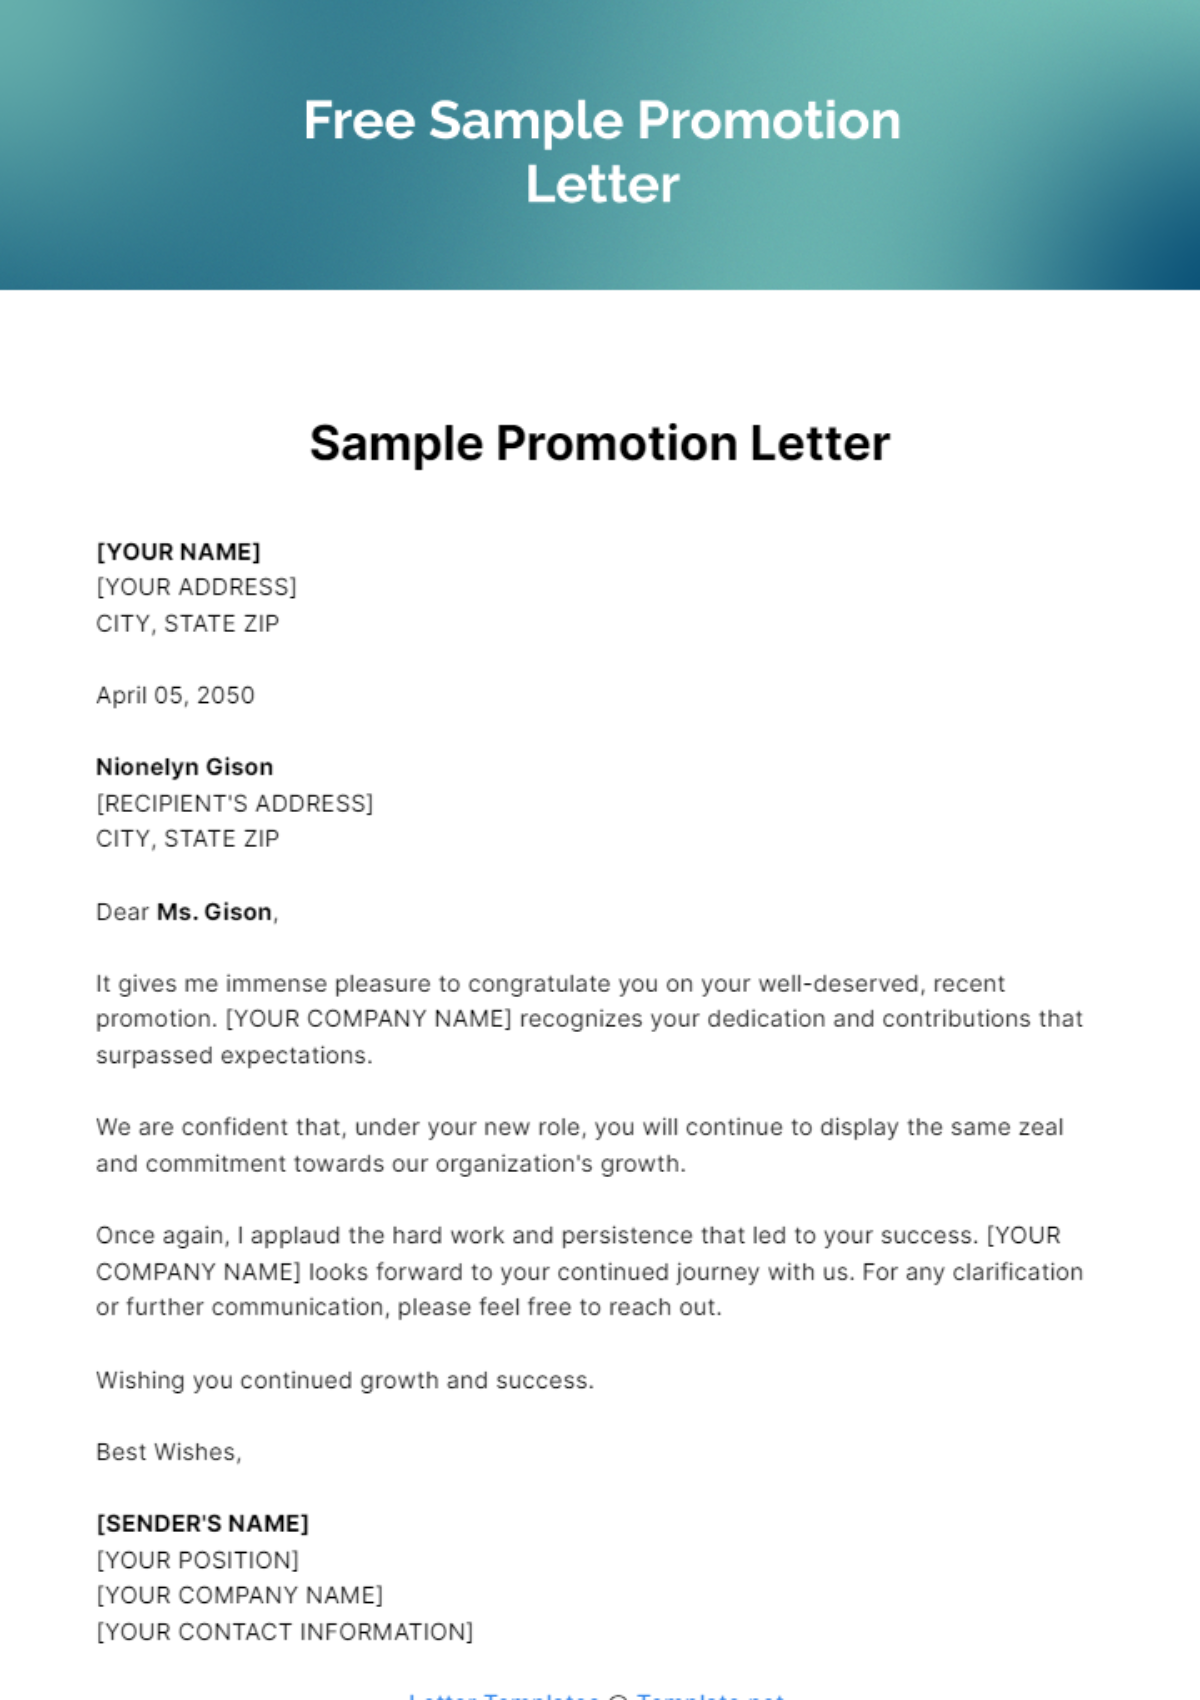 Free Sample Promotion Letter Template